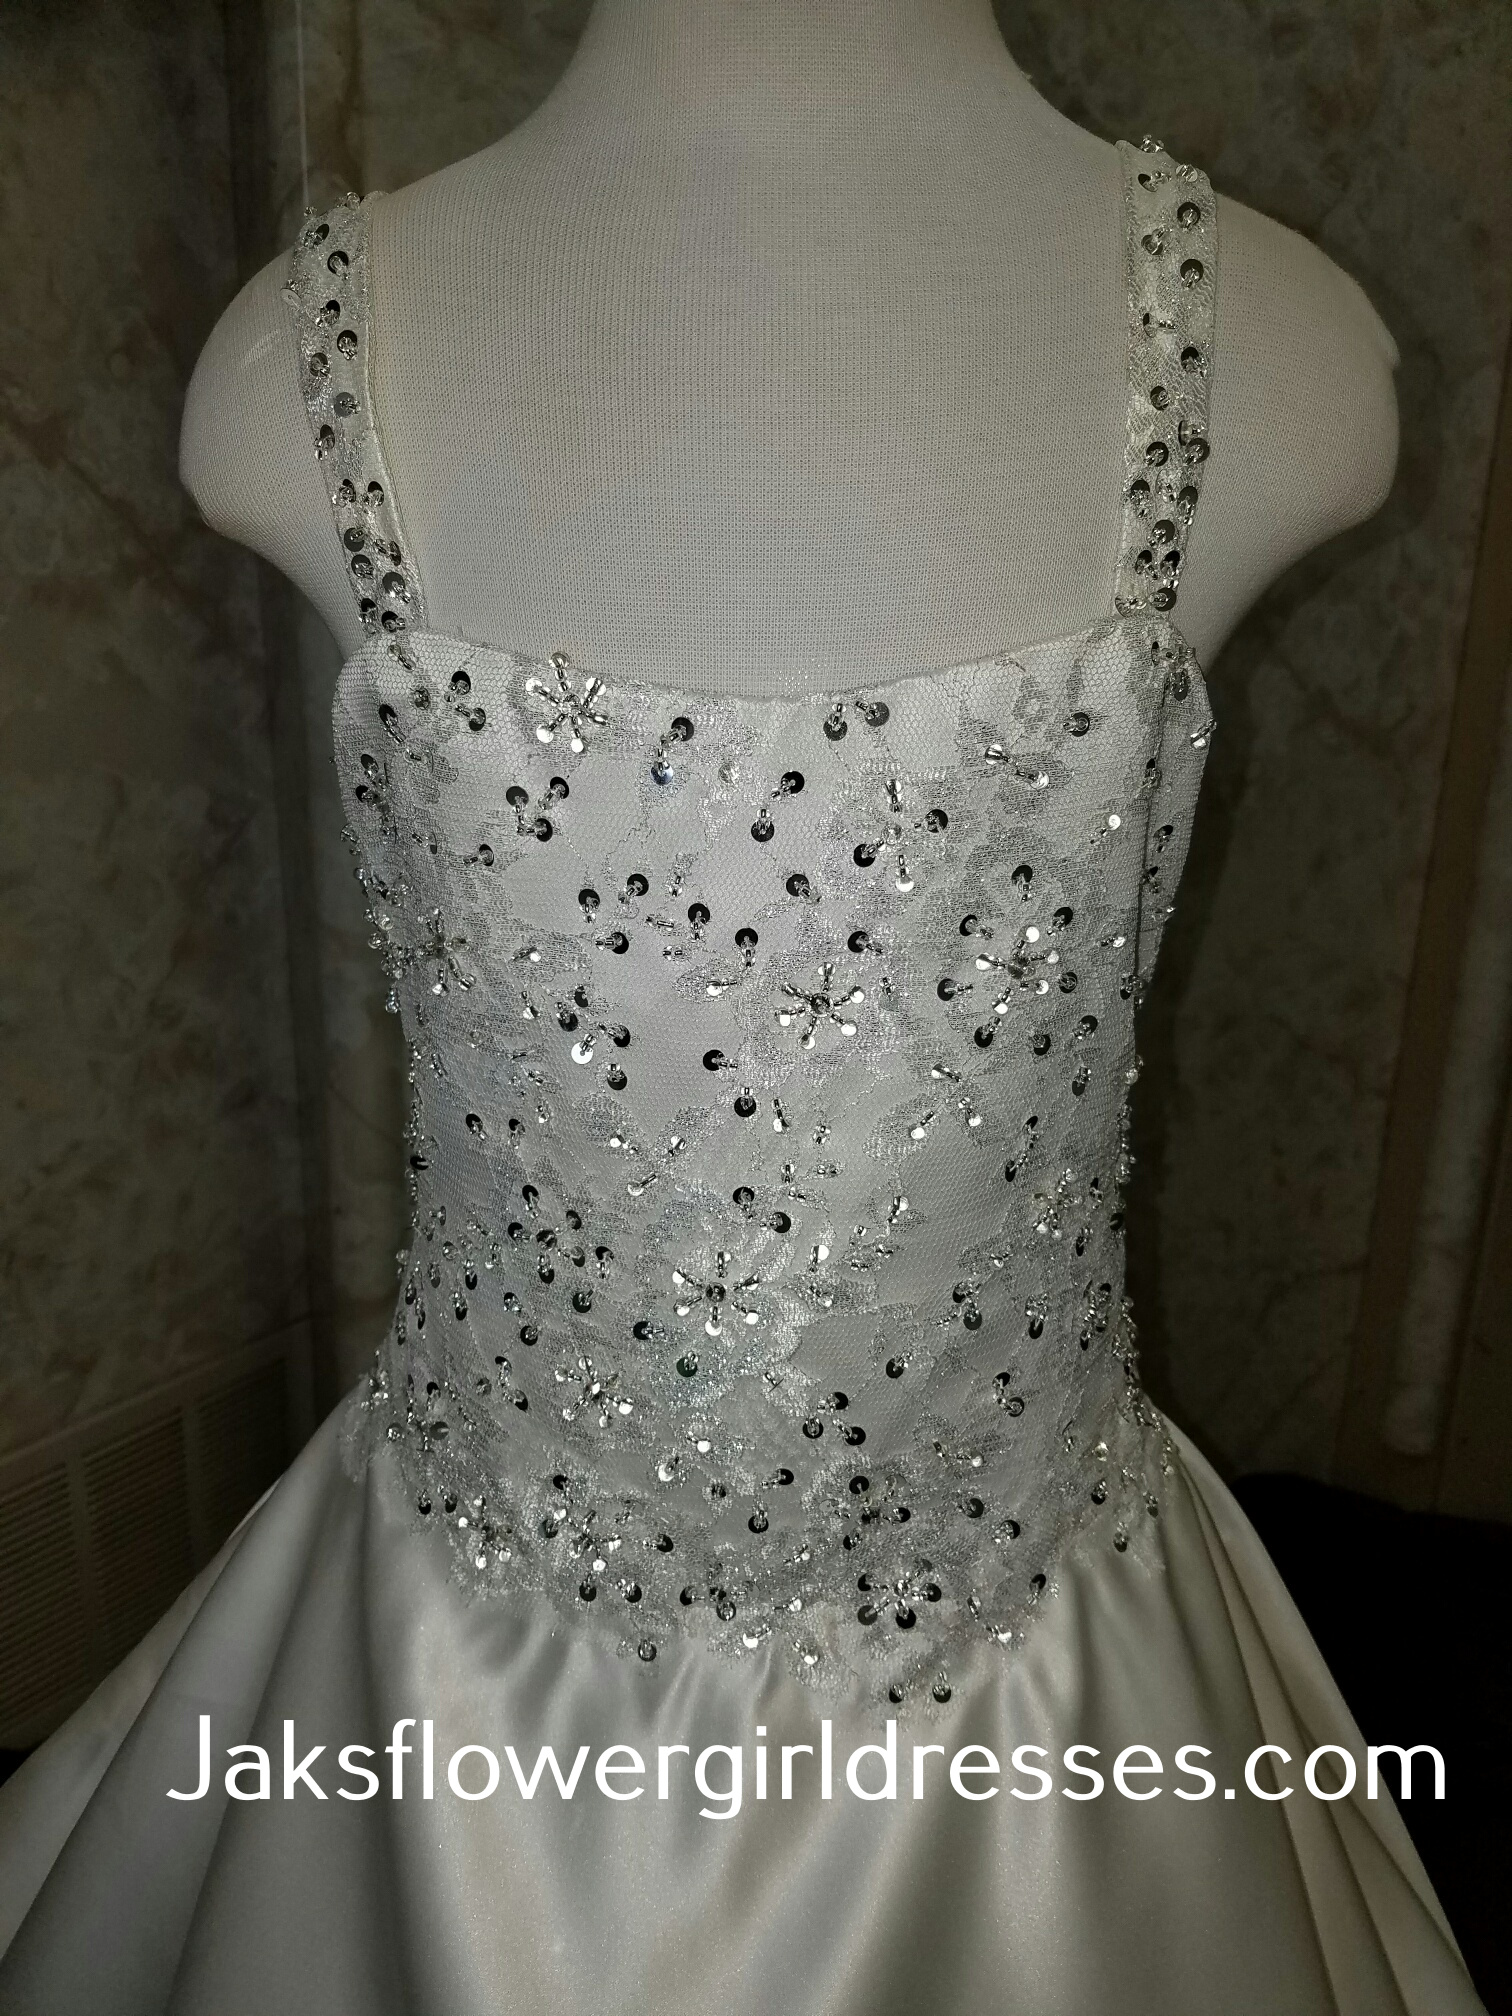 miniature bride dress with beaded lace